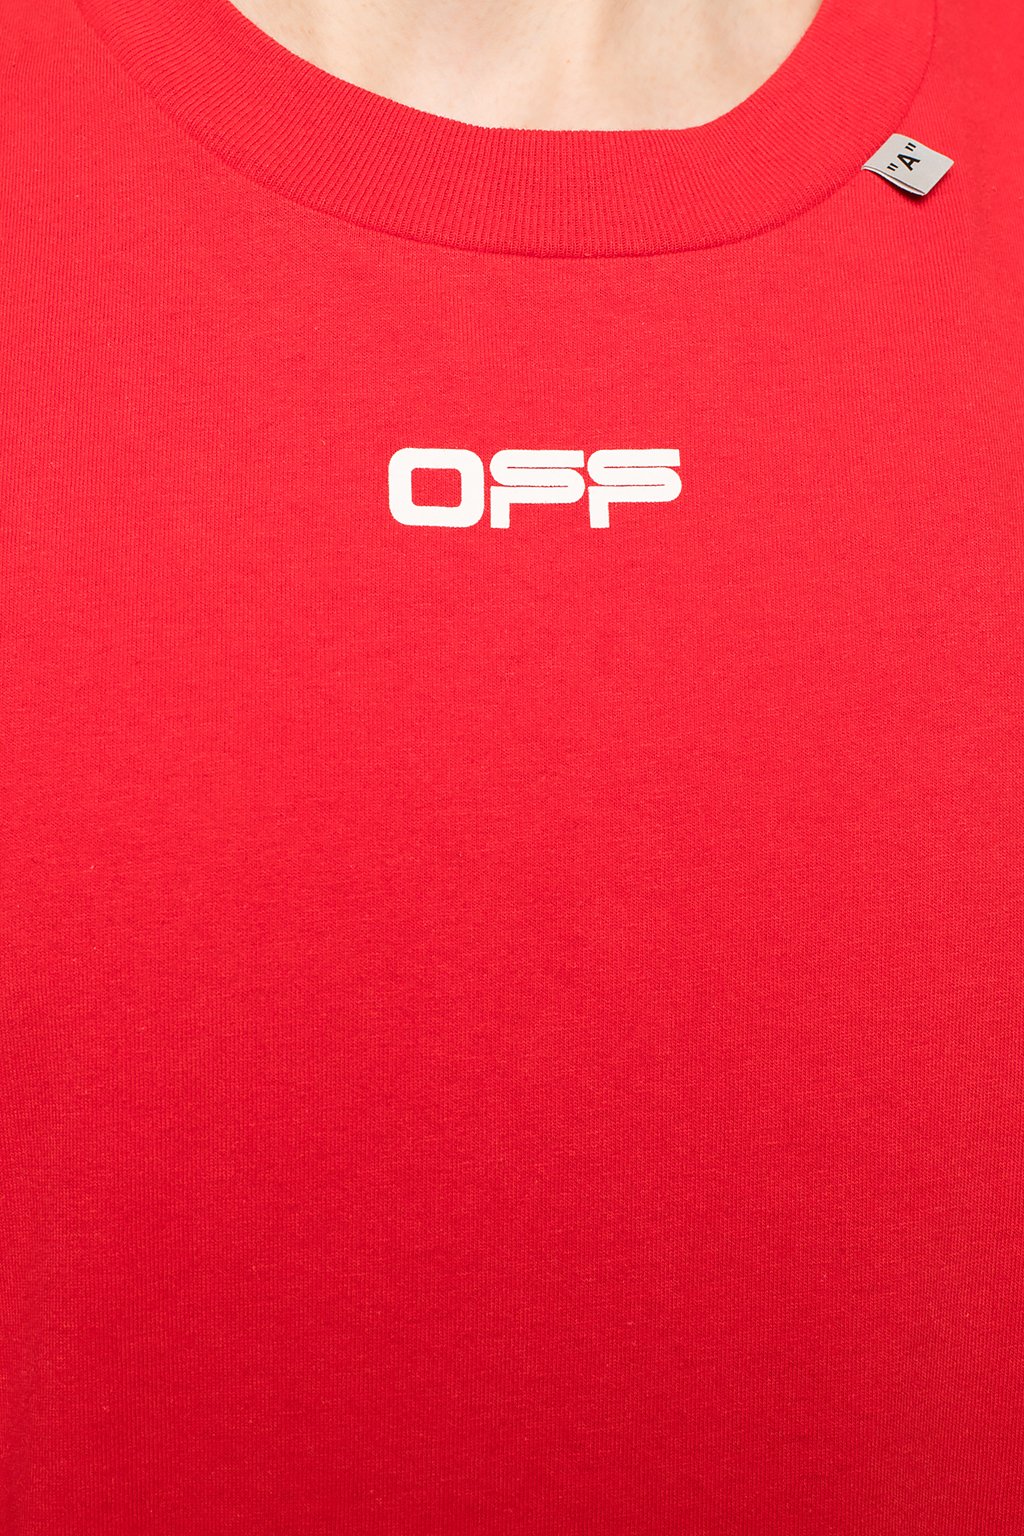 off white red and white t shirt